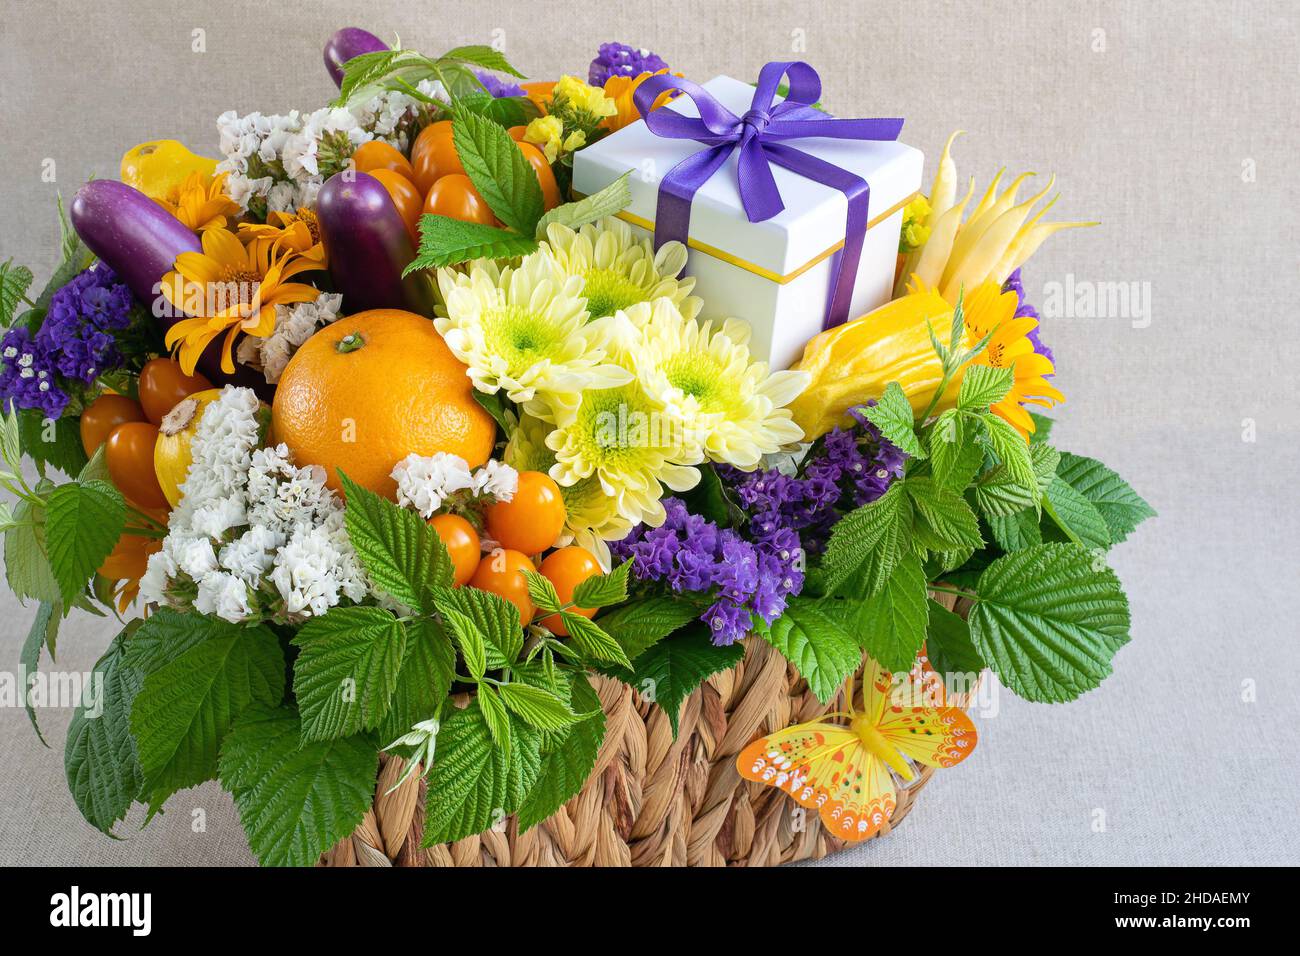 Colorful composition of vegetables and fruits on light background Stock Photo